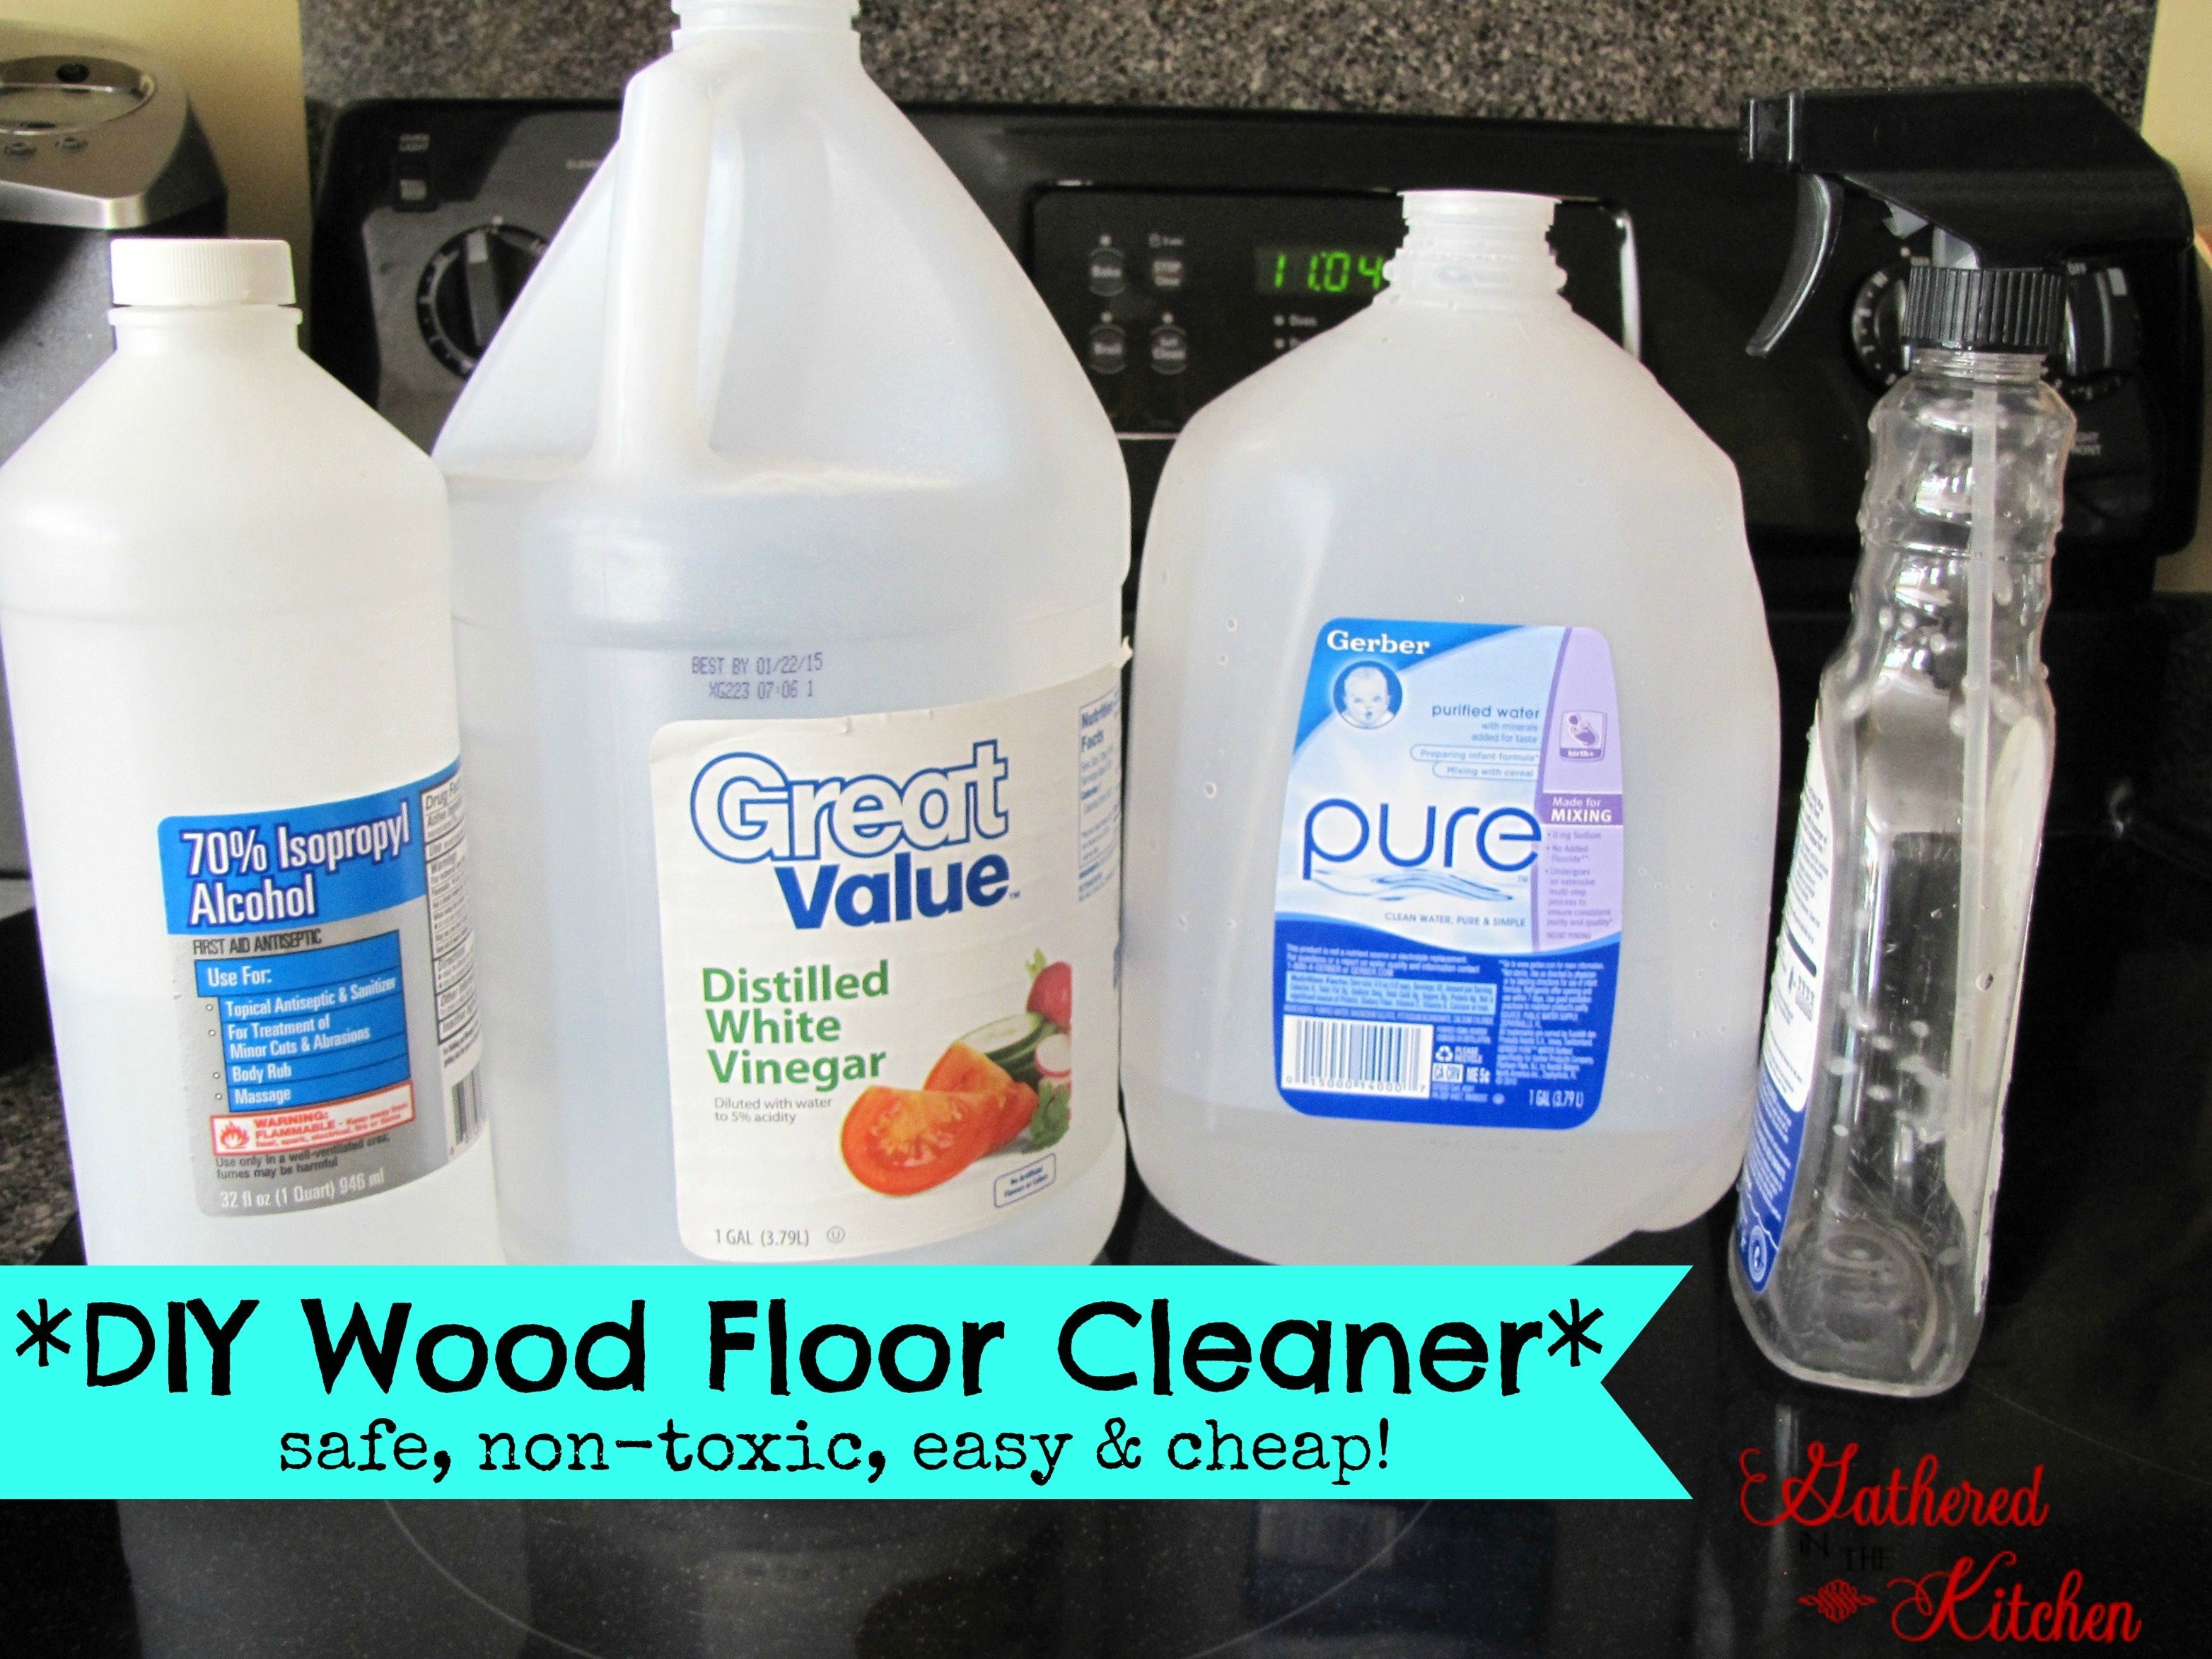 can i clean hardwood floors with vinegar and water of breathtaking clean wood floors with vinegar beautiful floors are in breathtaking clean wood floor with vinegar washing laminate and water idea cleaning hardwood decoration in size